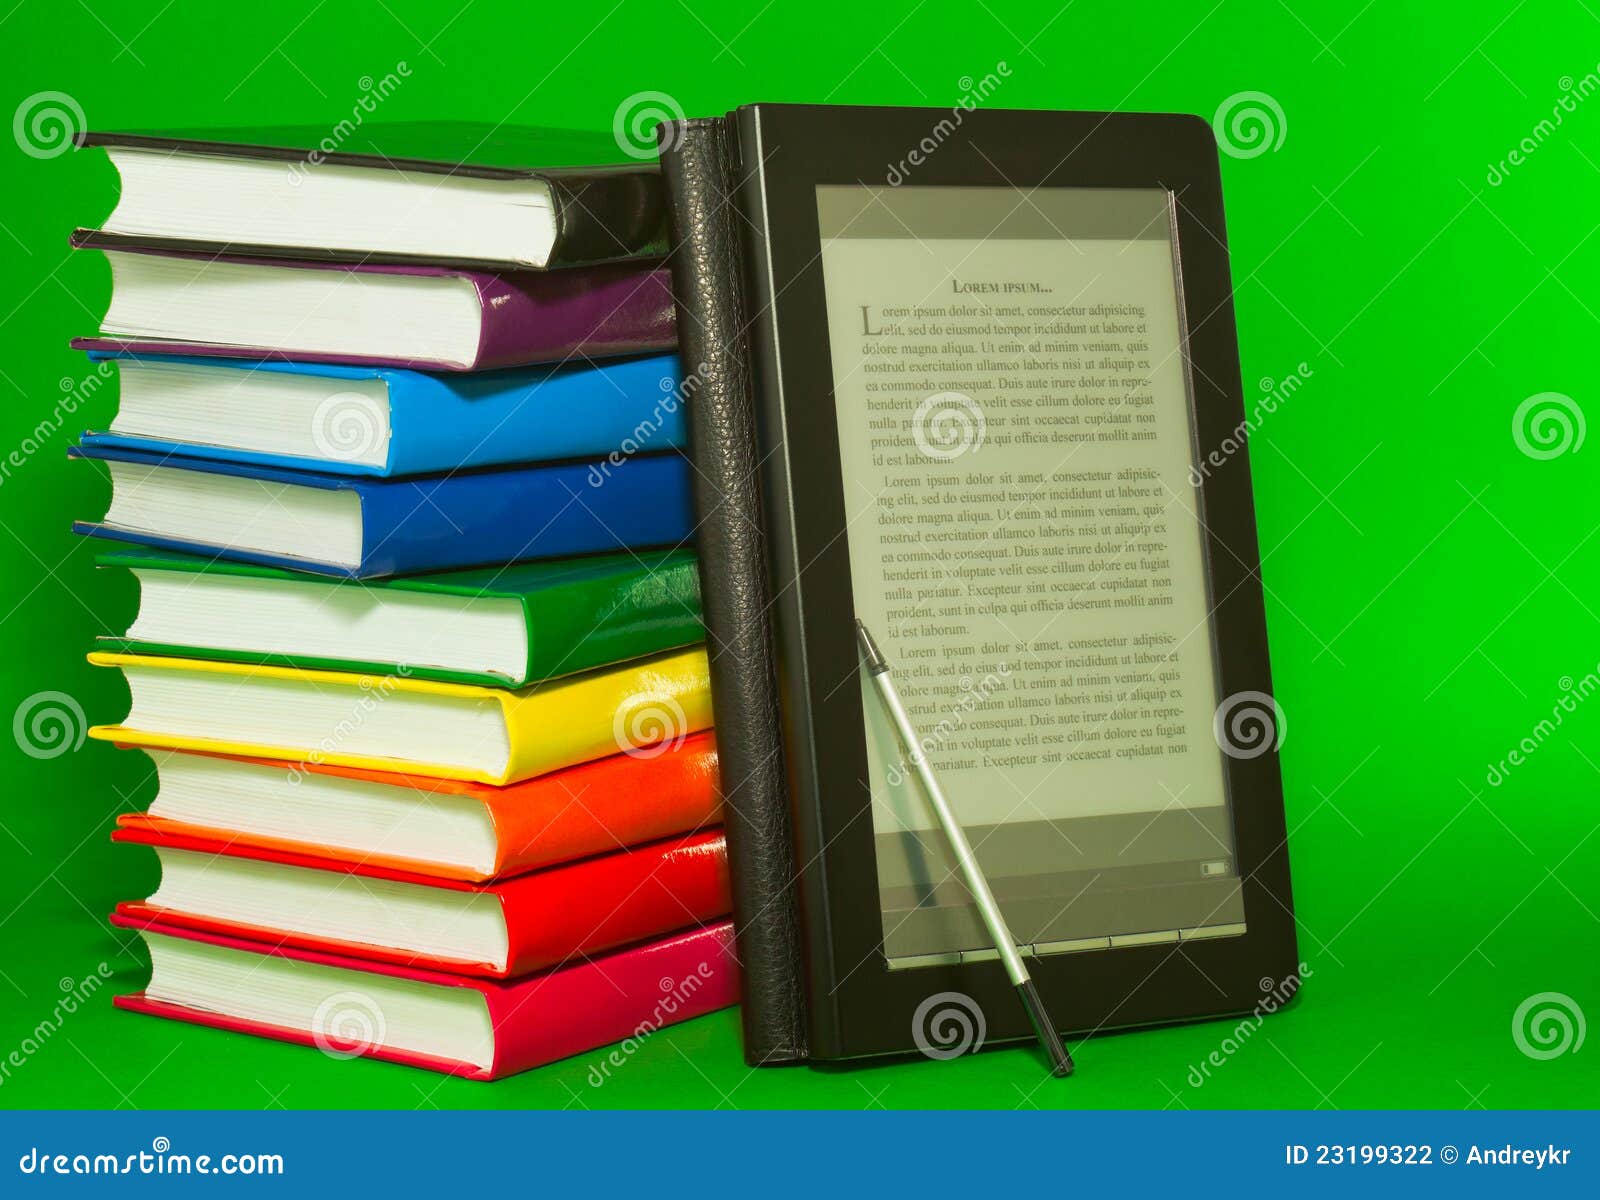 e-book reader with stack of printed books